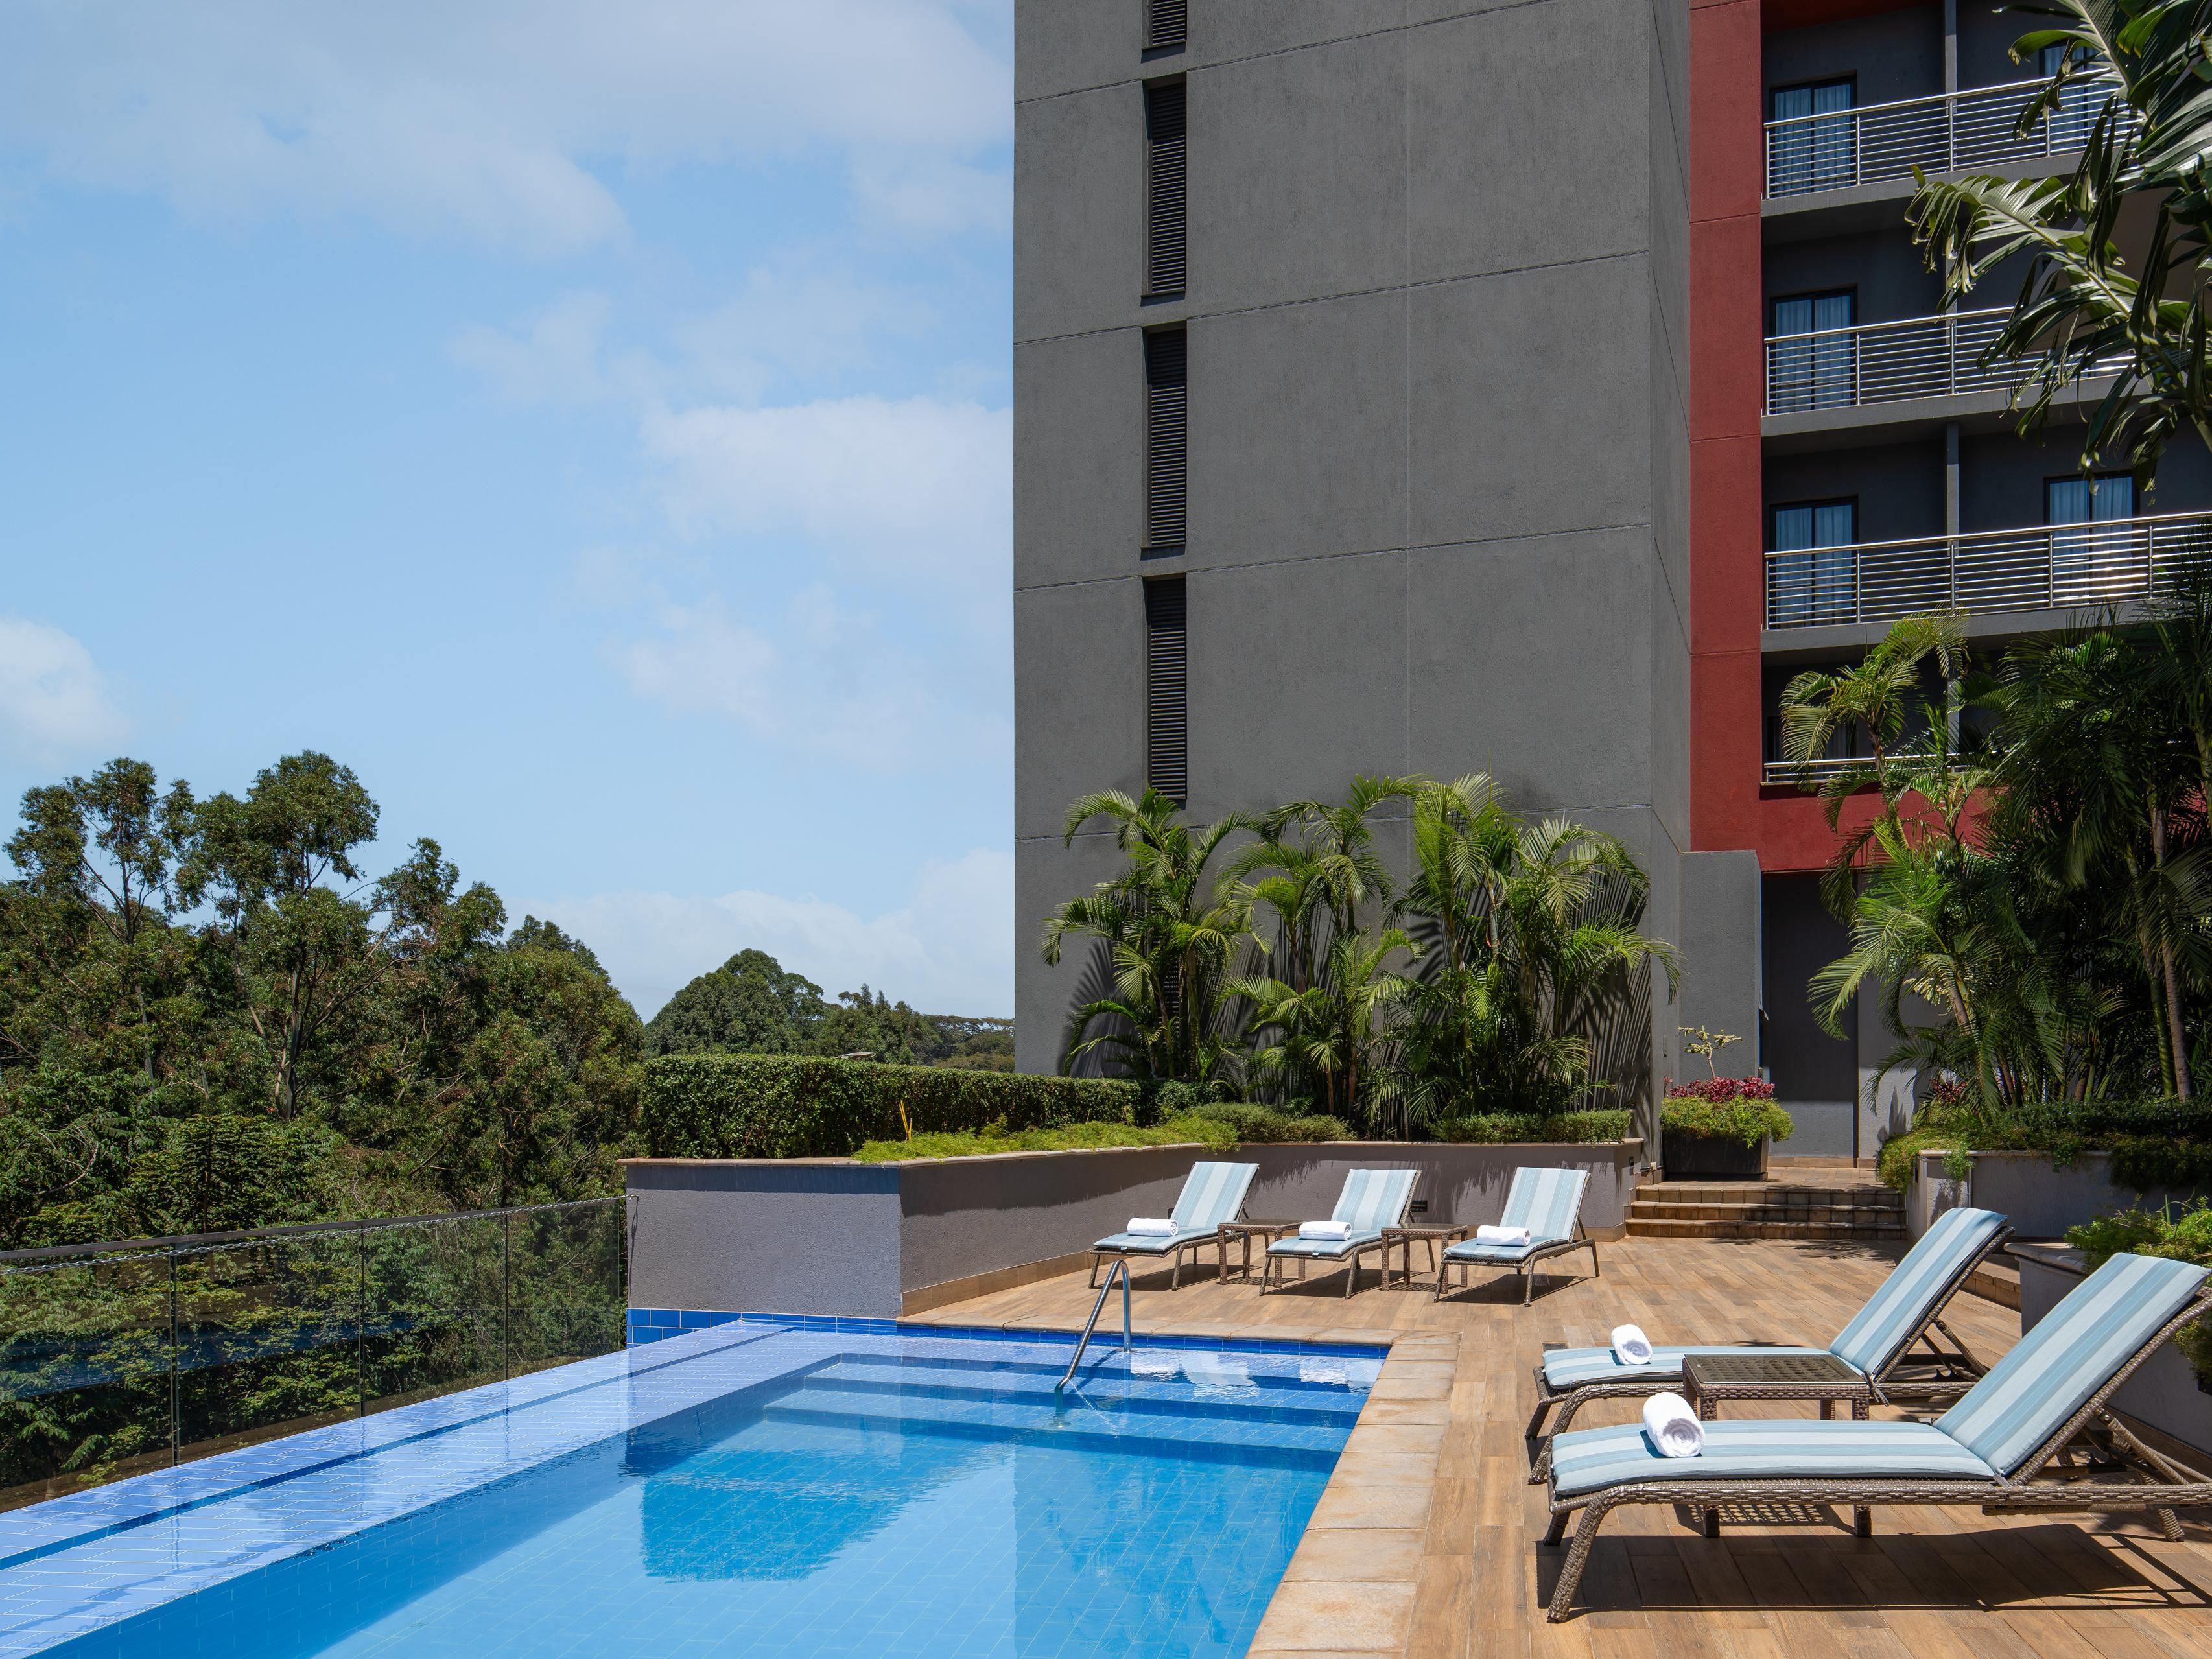 Cool off from the Nairobi sun with a refreshing dip in our family-friendly outdoor pool, a unique feature among hotels in Nairobi. With sunbeds set for relaxation and nature serenading your stay, it's a slice of paradise. Our pool bar menu tempts with bite-sized treats and crafted cocktails, elevating your poolside experience.